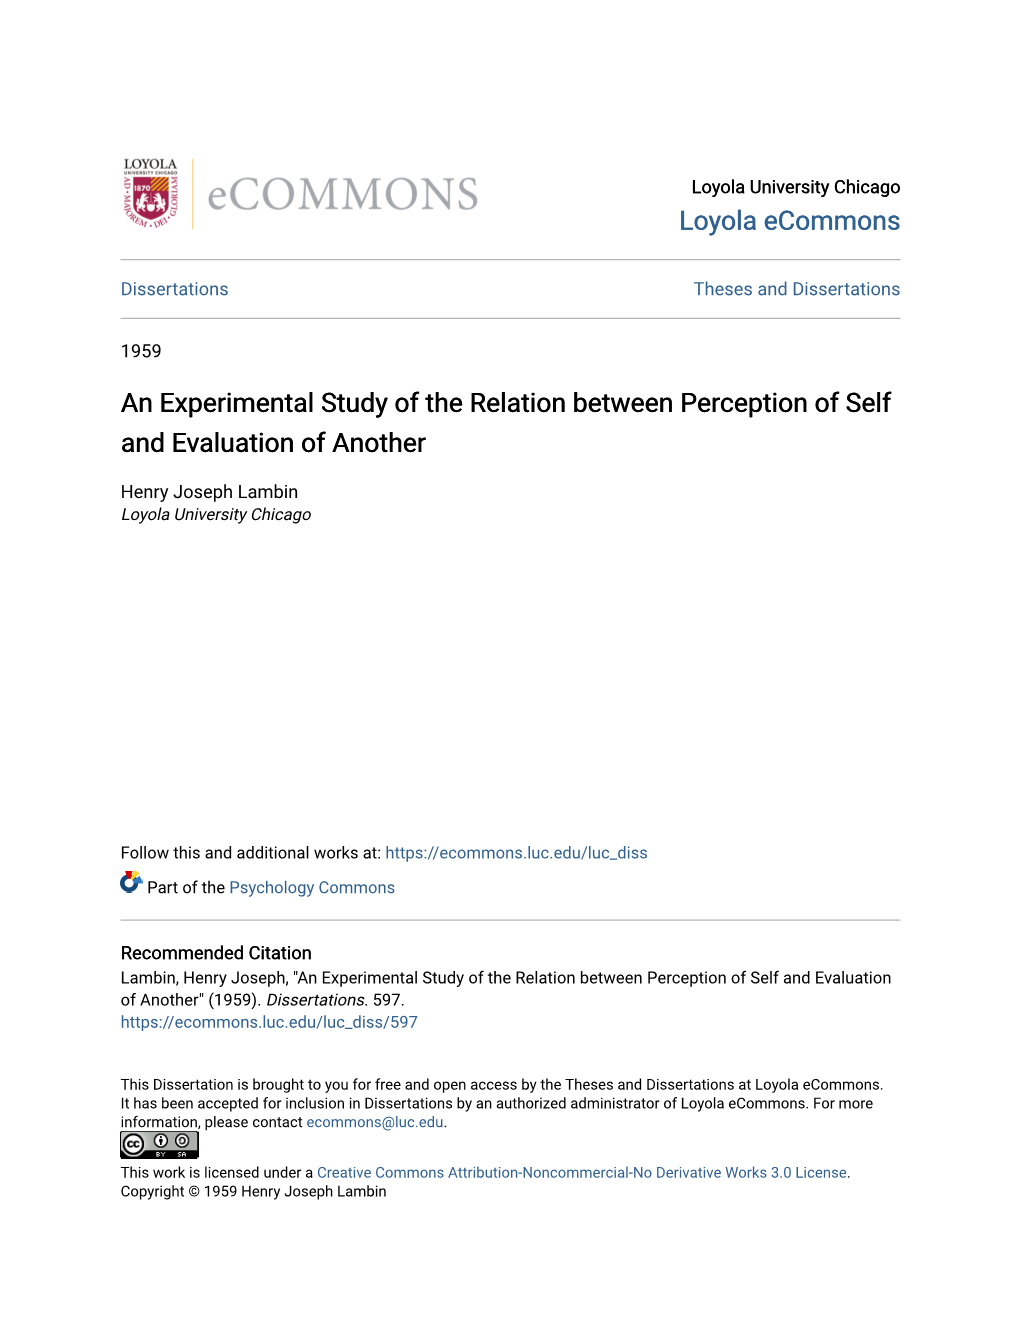 An Experimental Study of the Relation Between Perception of Self and Evaluation of Another